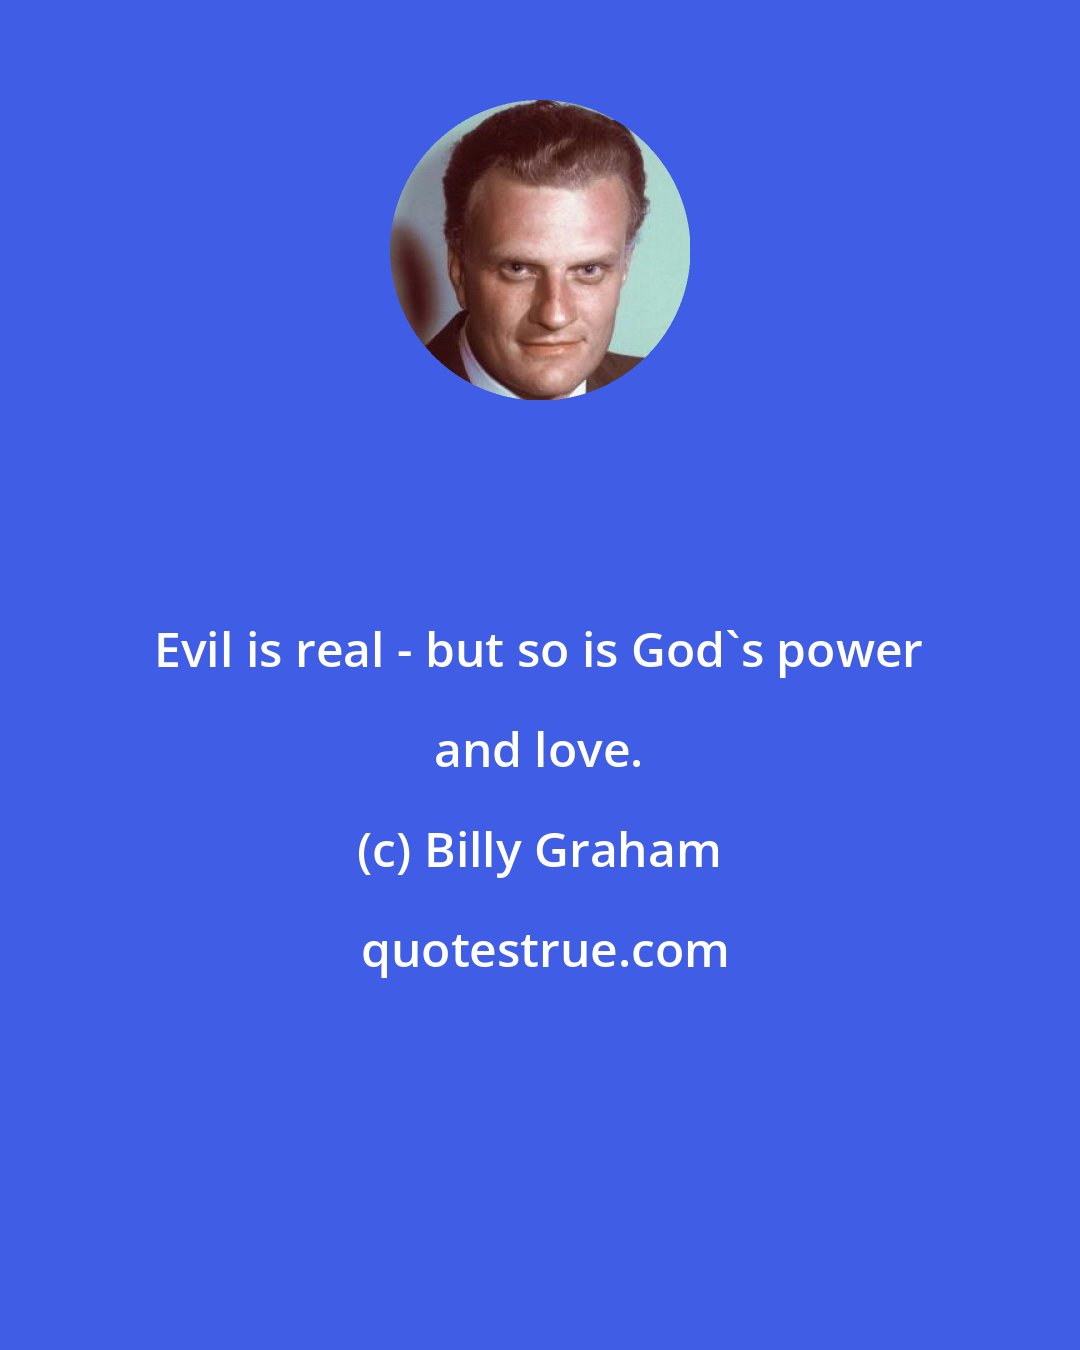 Billy Graham: Evil is real - but so is God's power and love.